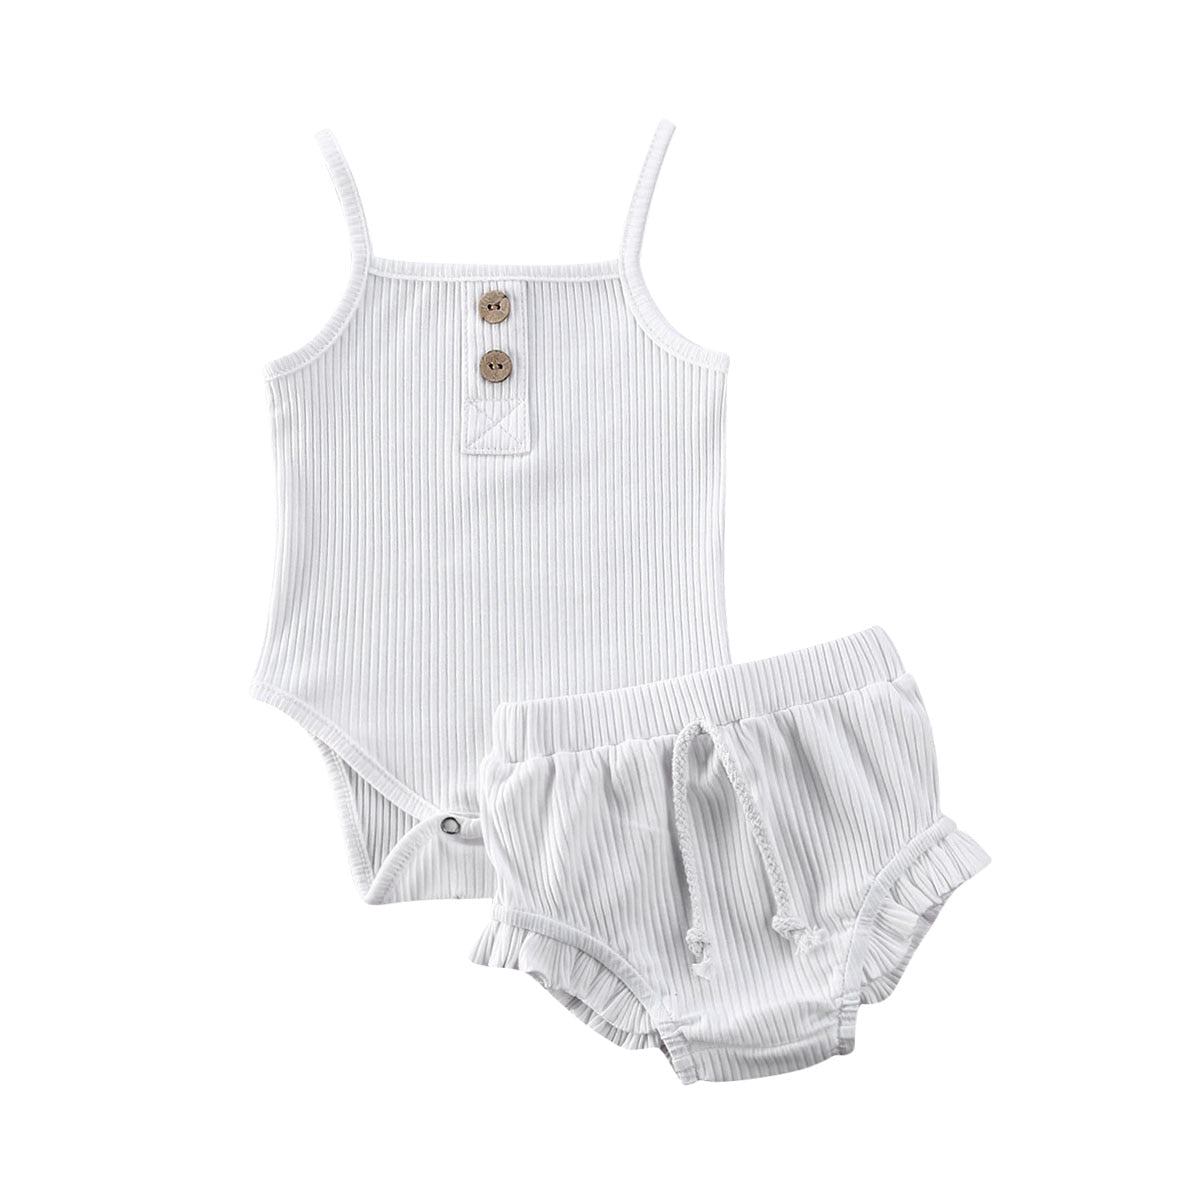 Kids Baby Clothes for Newborn Baby Boys Girls Solid Lace-up Knitted Backless Rompers Drawstring Shorts Beach Outfits Sets